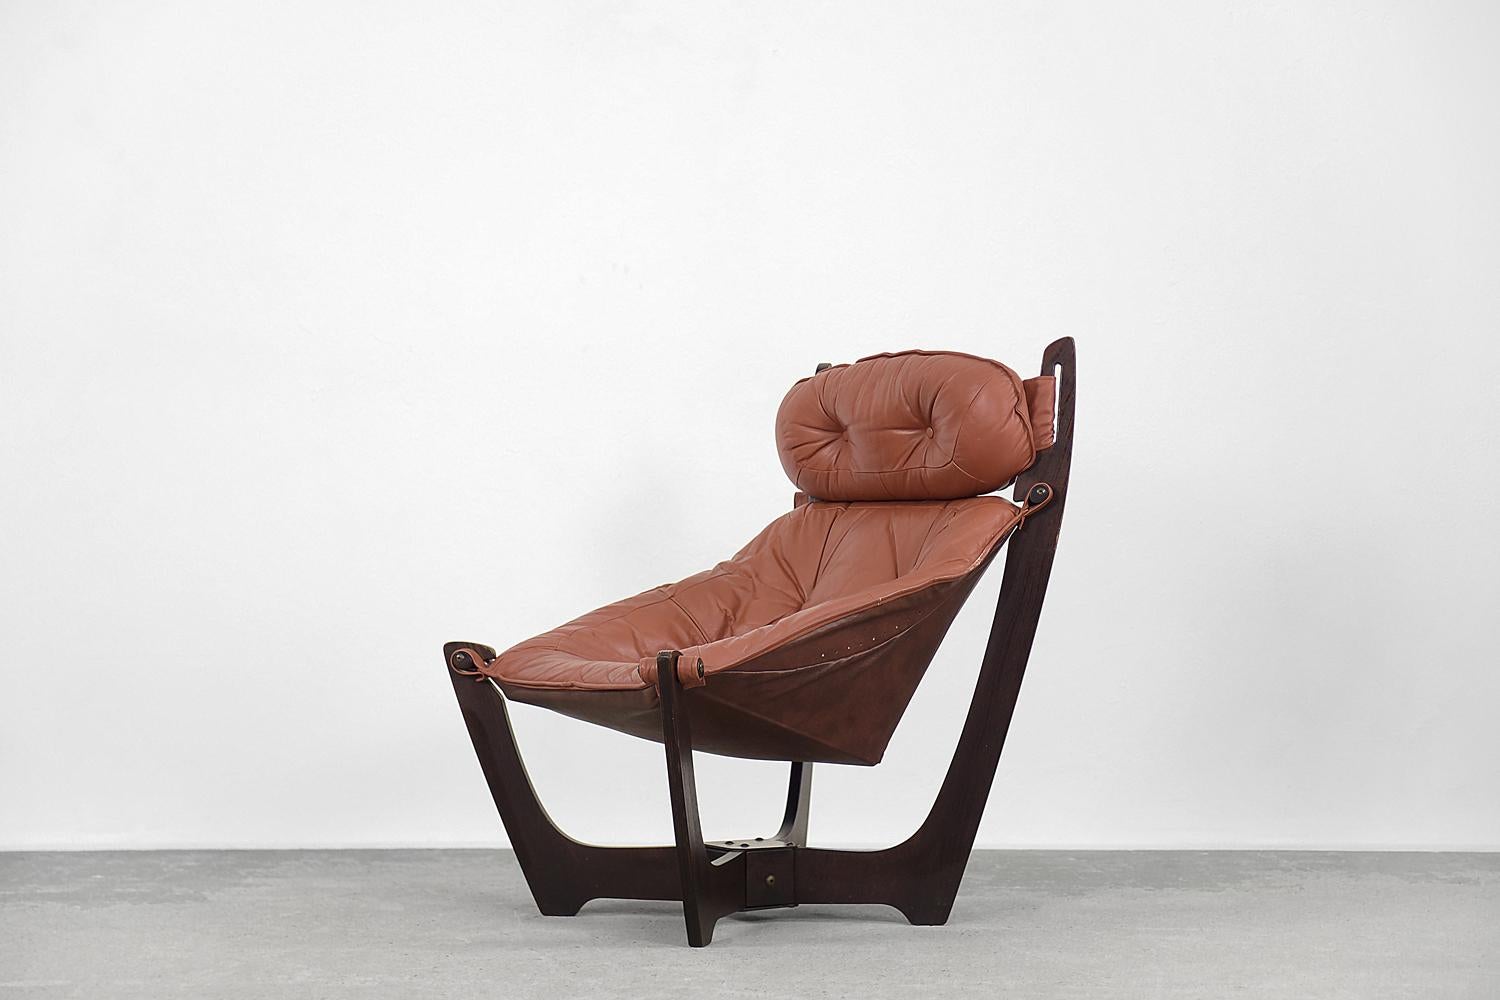 This modernist Luna armchair was designed by Odd Knutsen for the Norwegian manufacturer IMG Internasjonal Møbel Gruppe in Sykkylven in the 1970s. The frame of the armchair is made of rubber wood, which due to the high latex content, is exceptionally